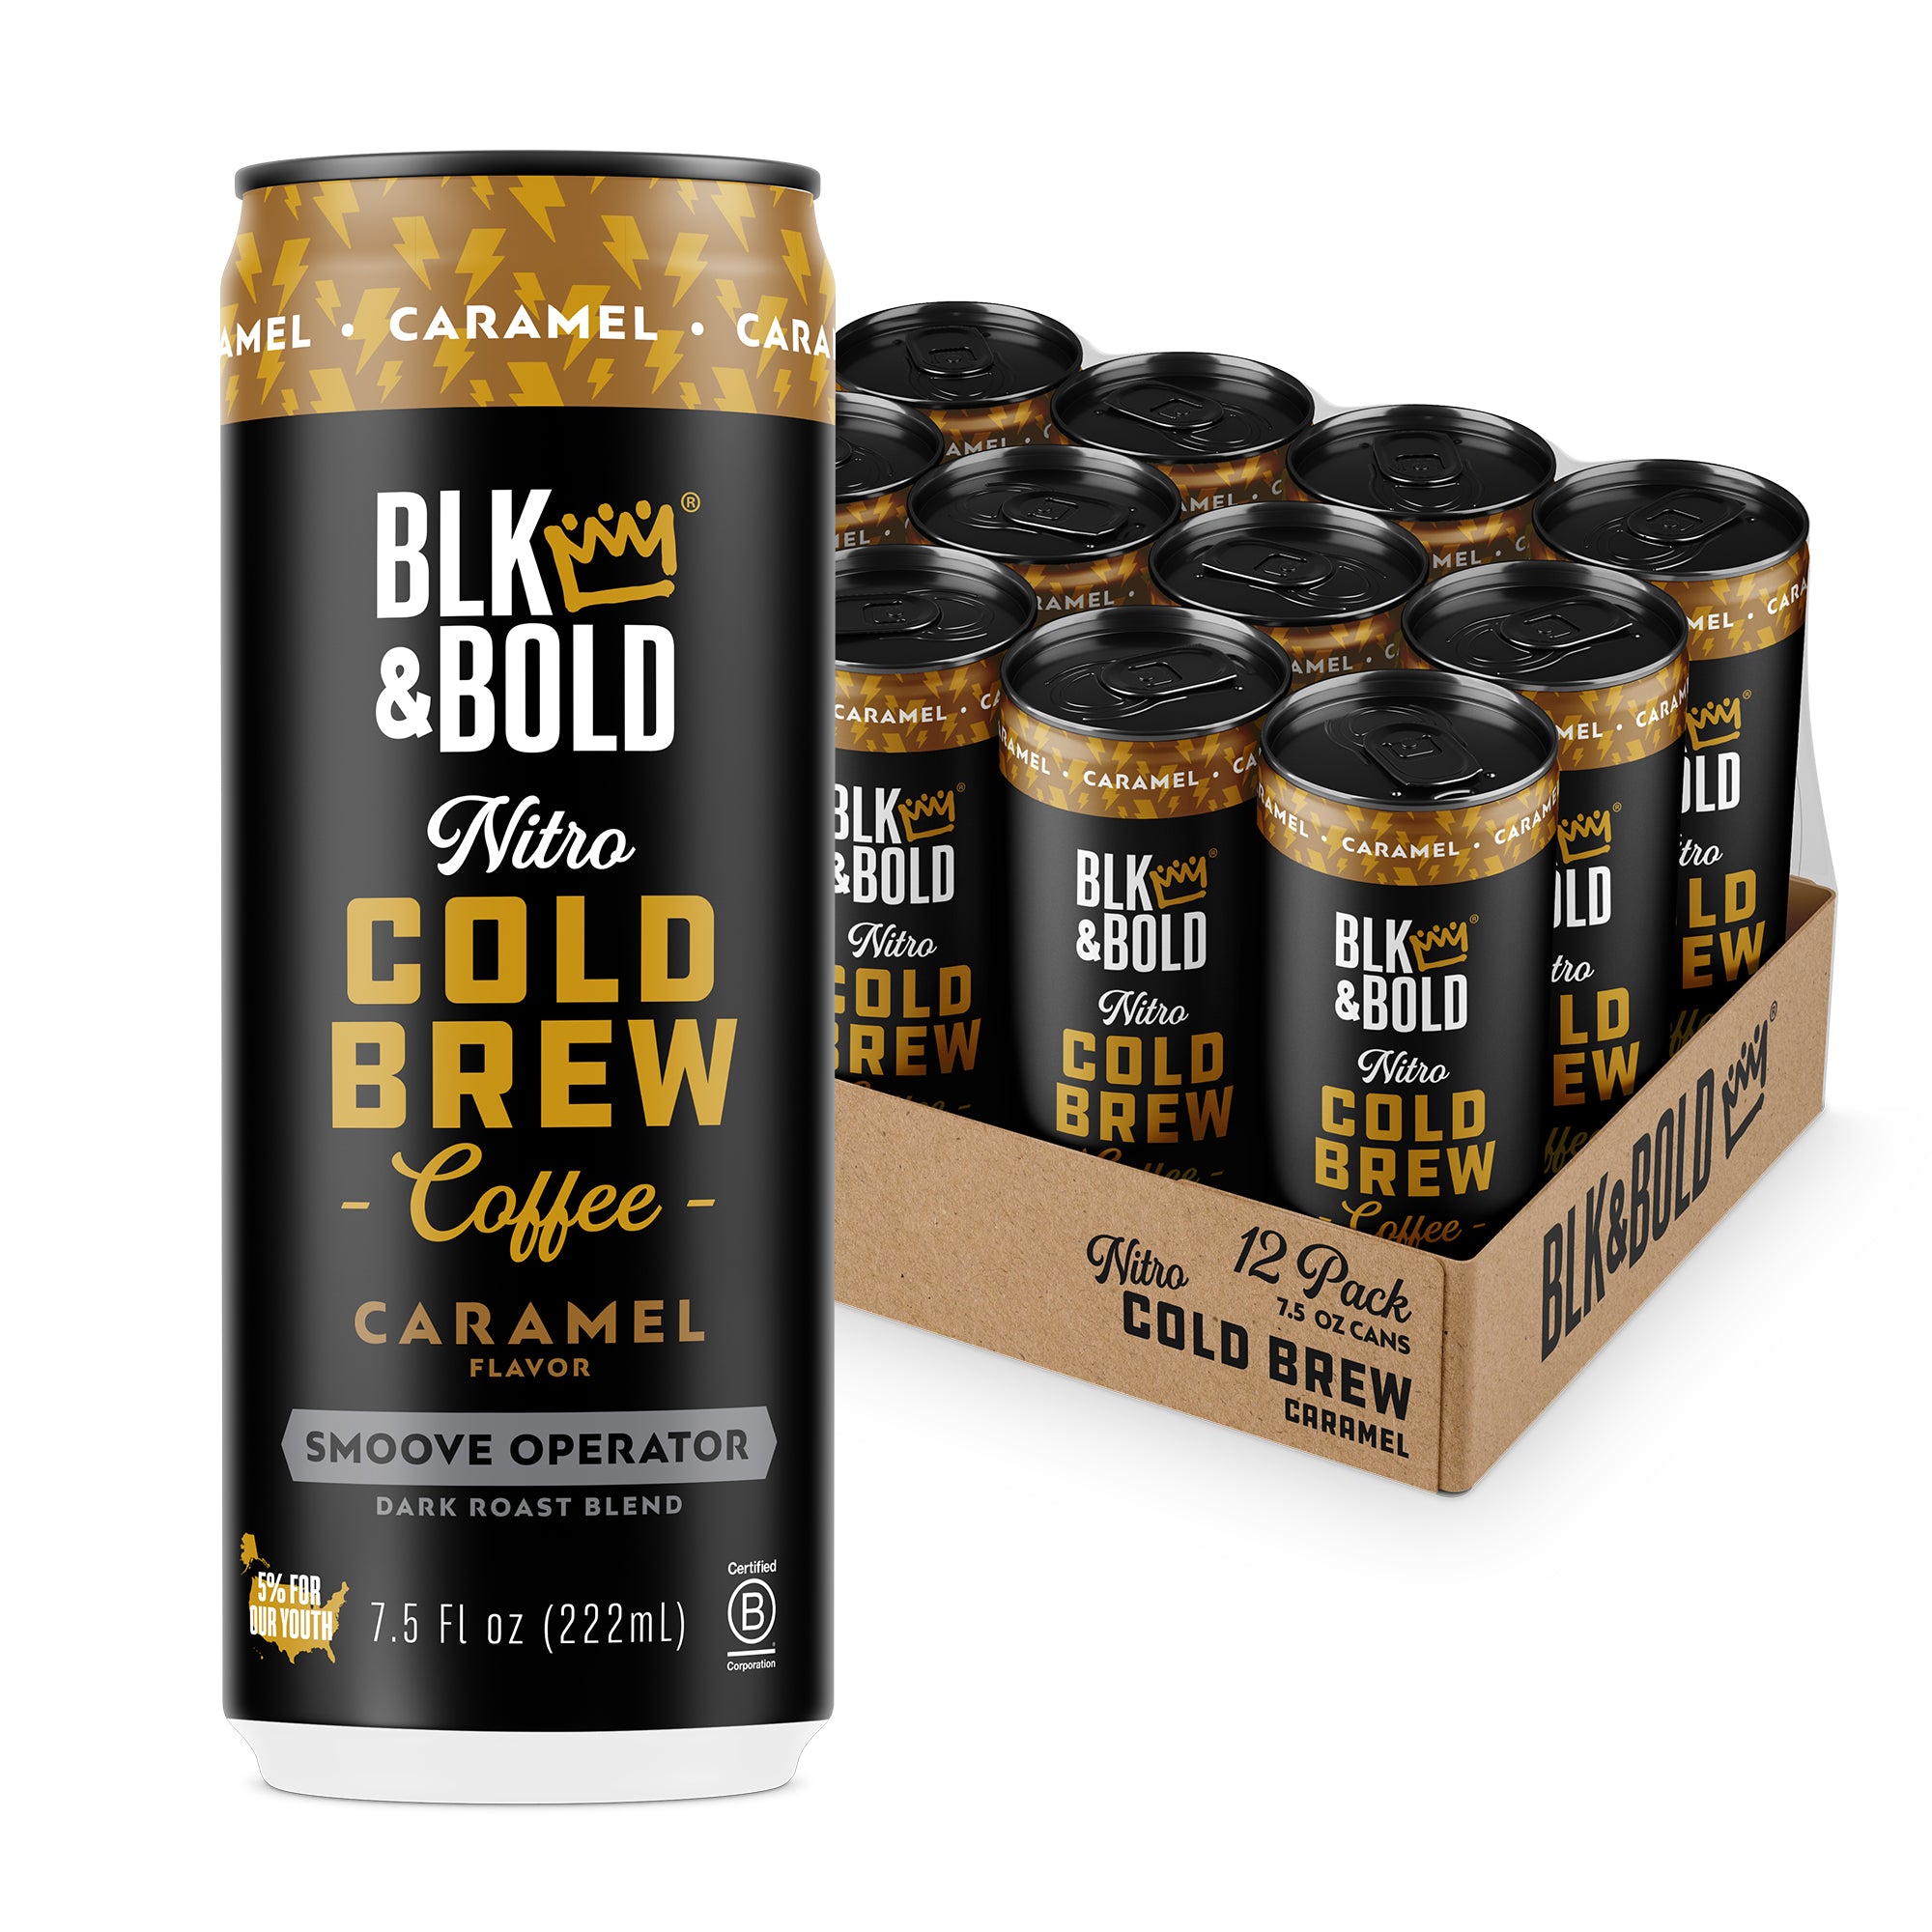 Starbucks Cold Cup W/cold Brew - 16floz : Target